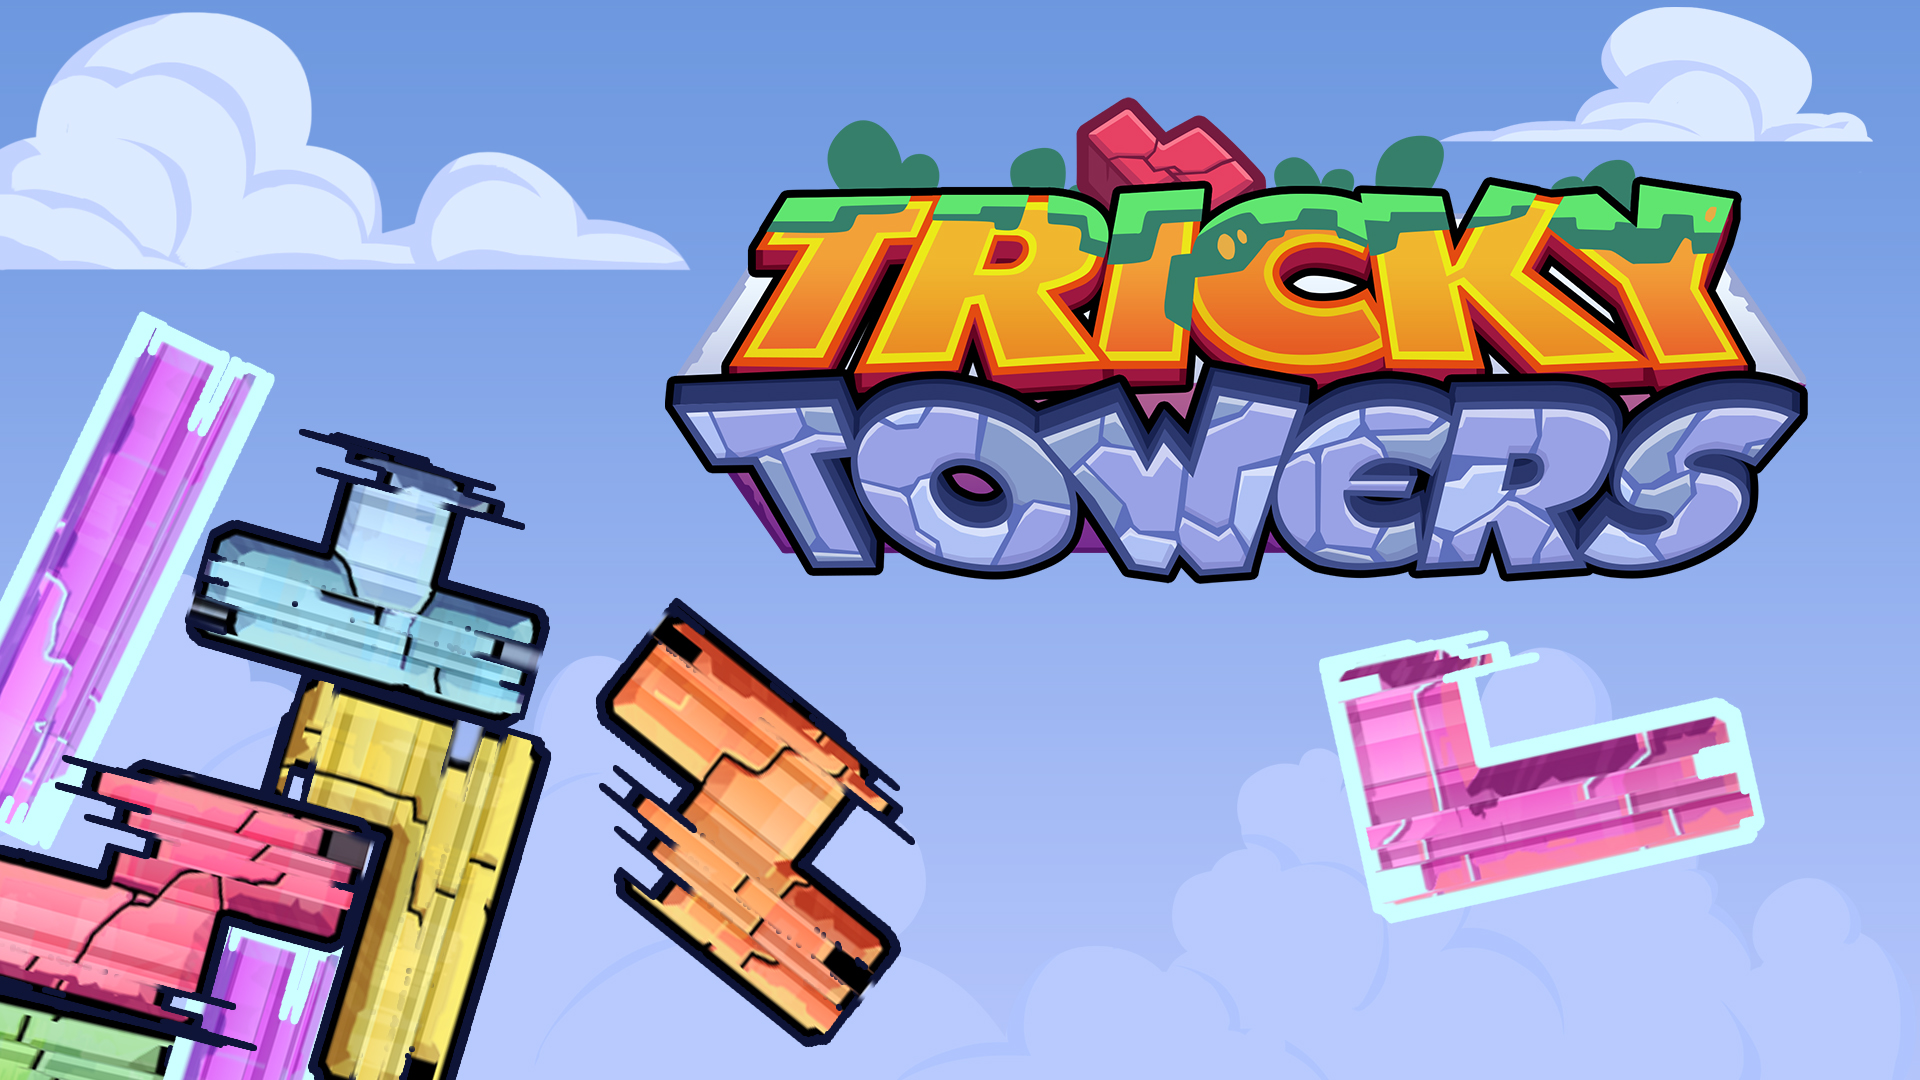 Tricky tower steam фото 39